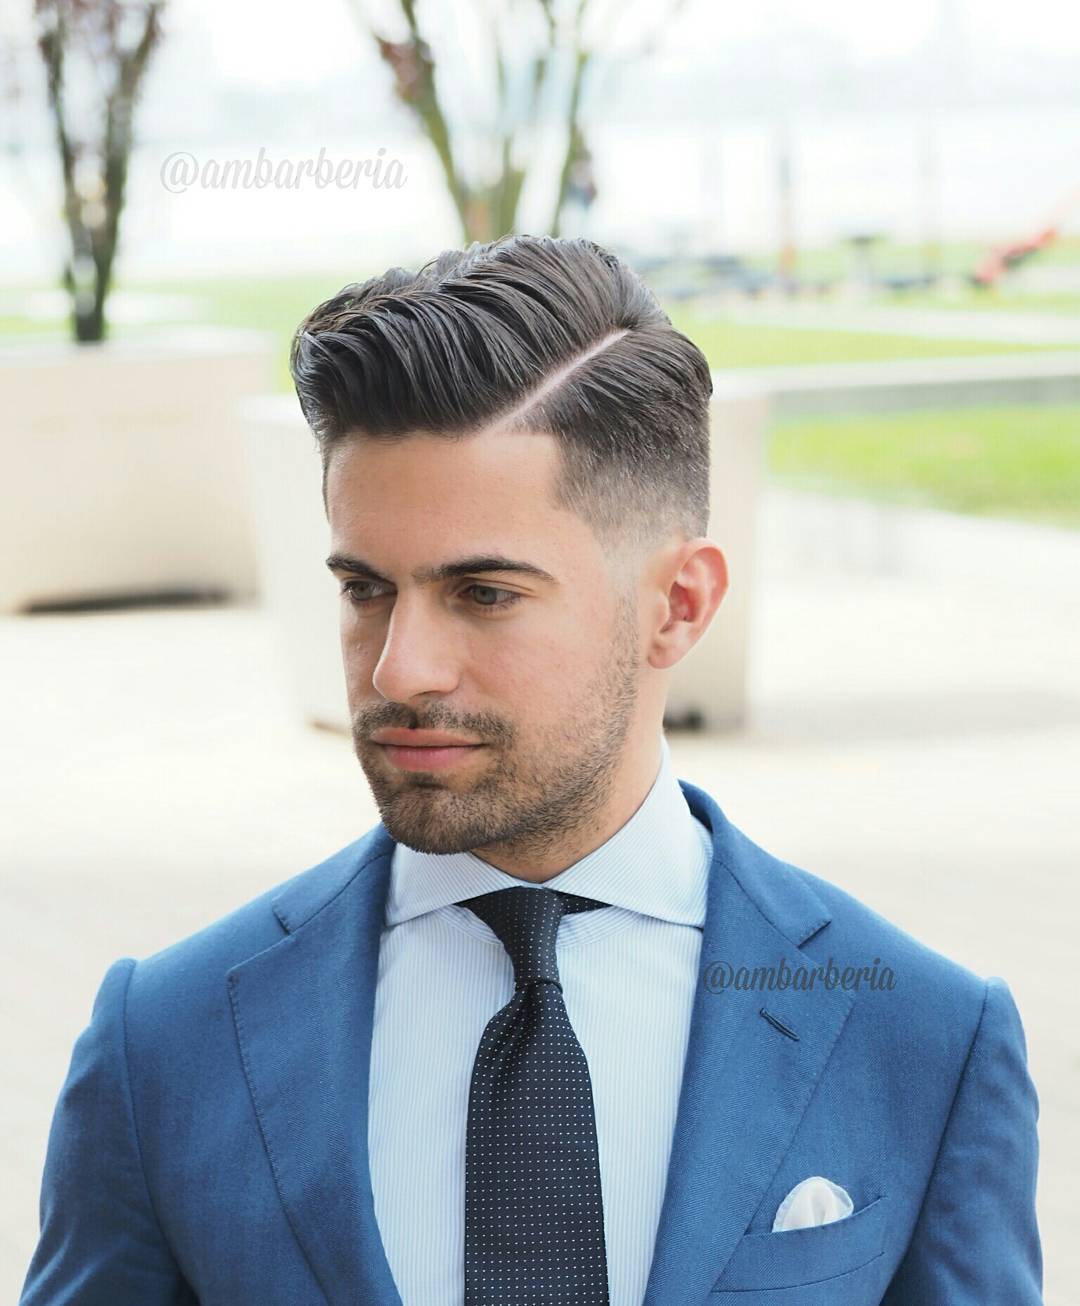 Textured Hairstyles For Men